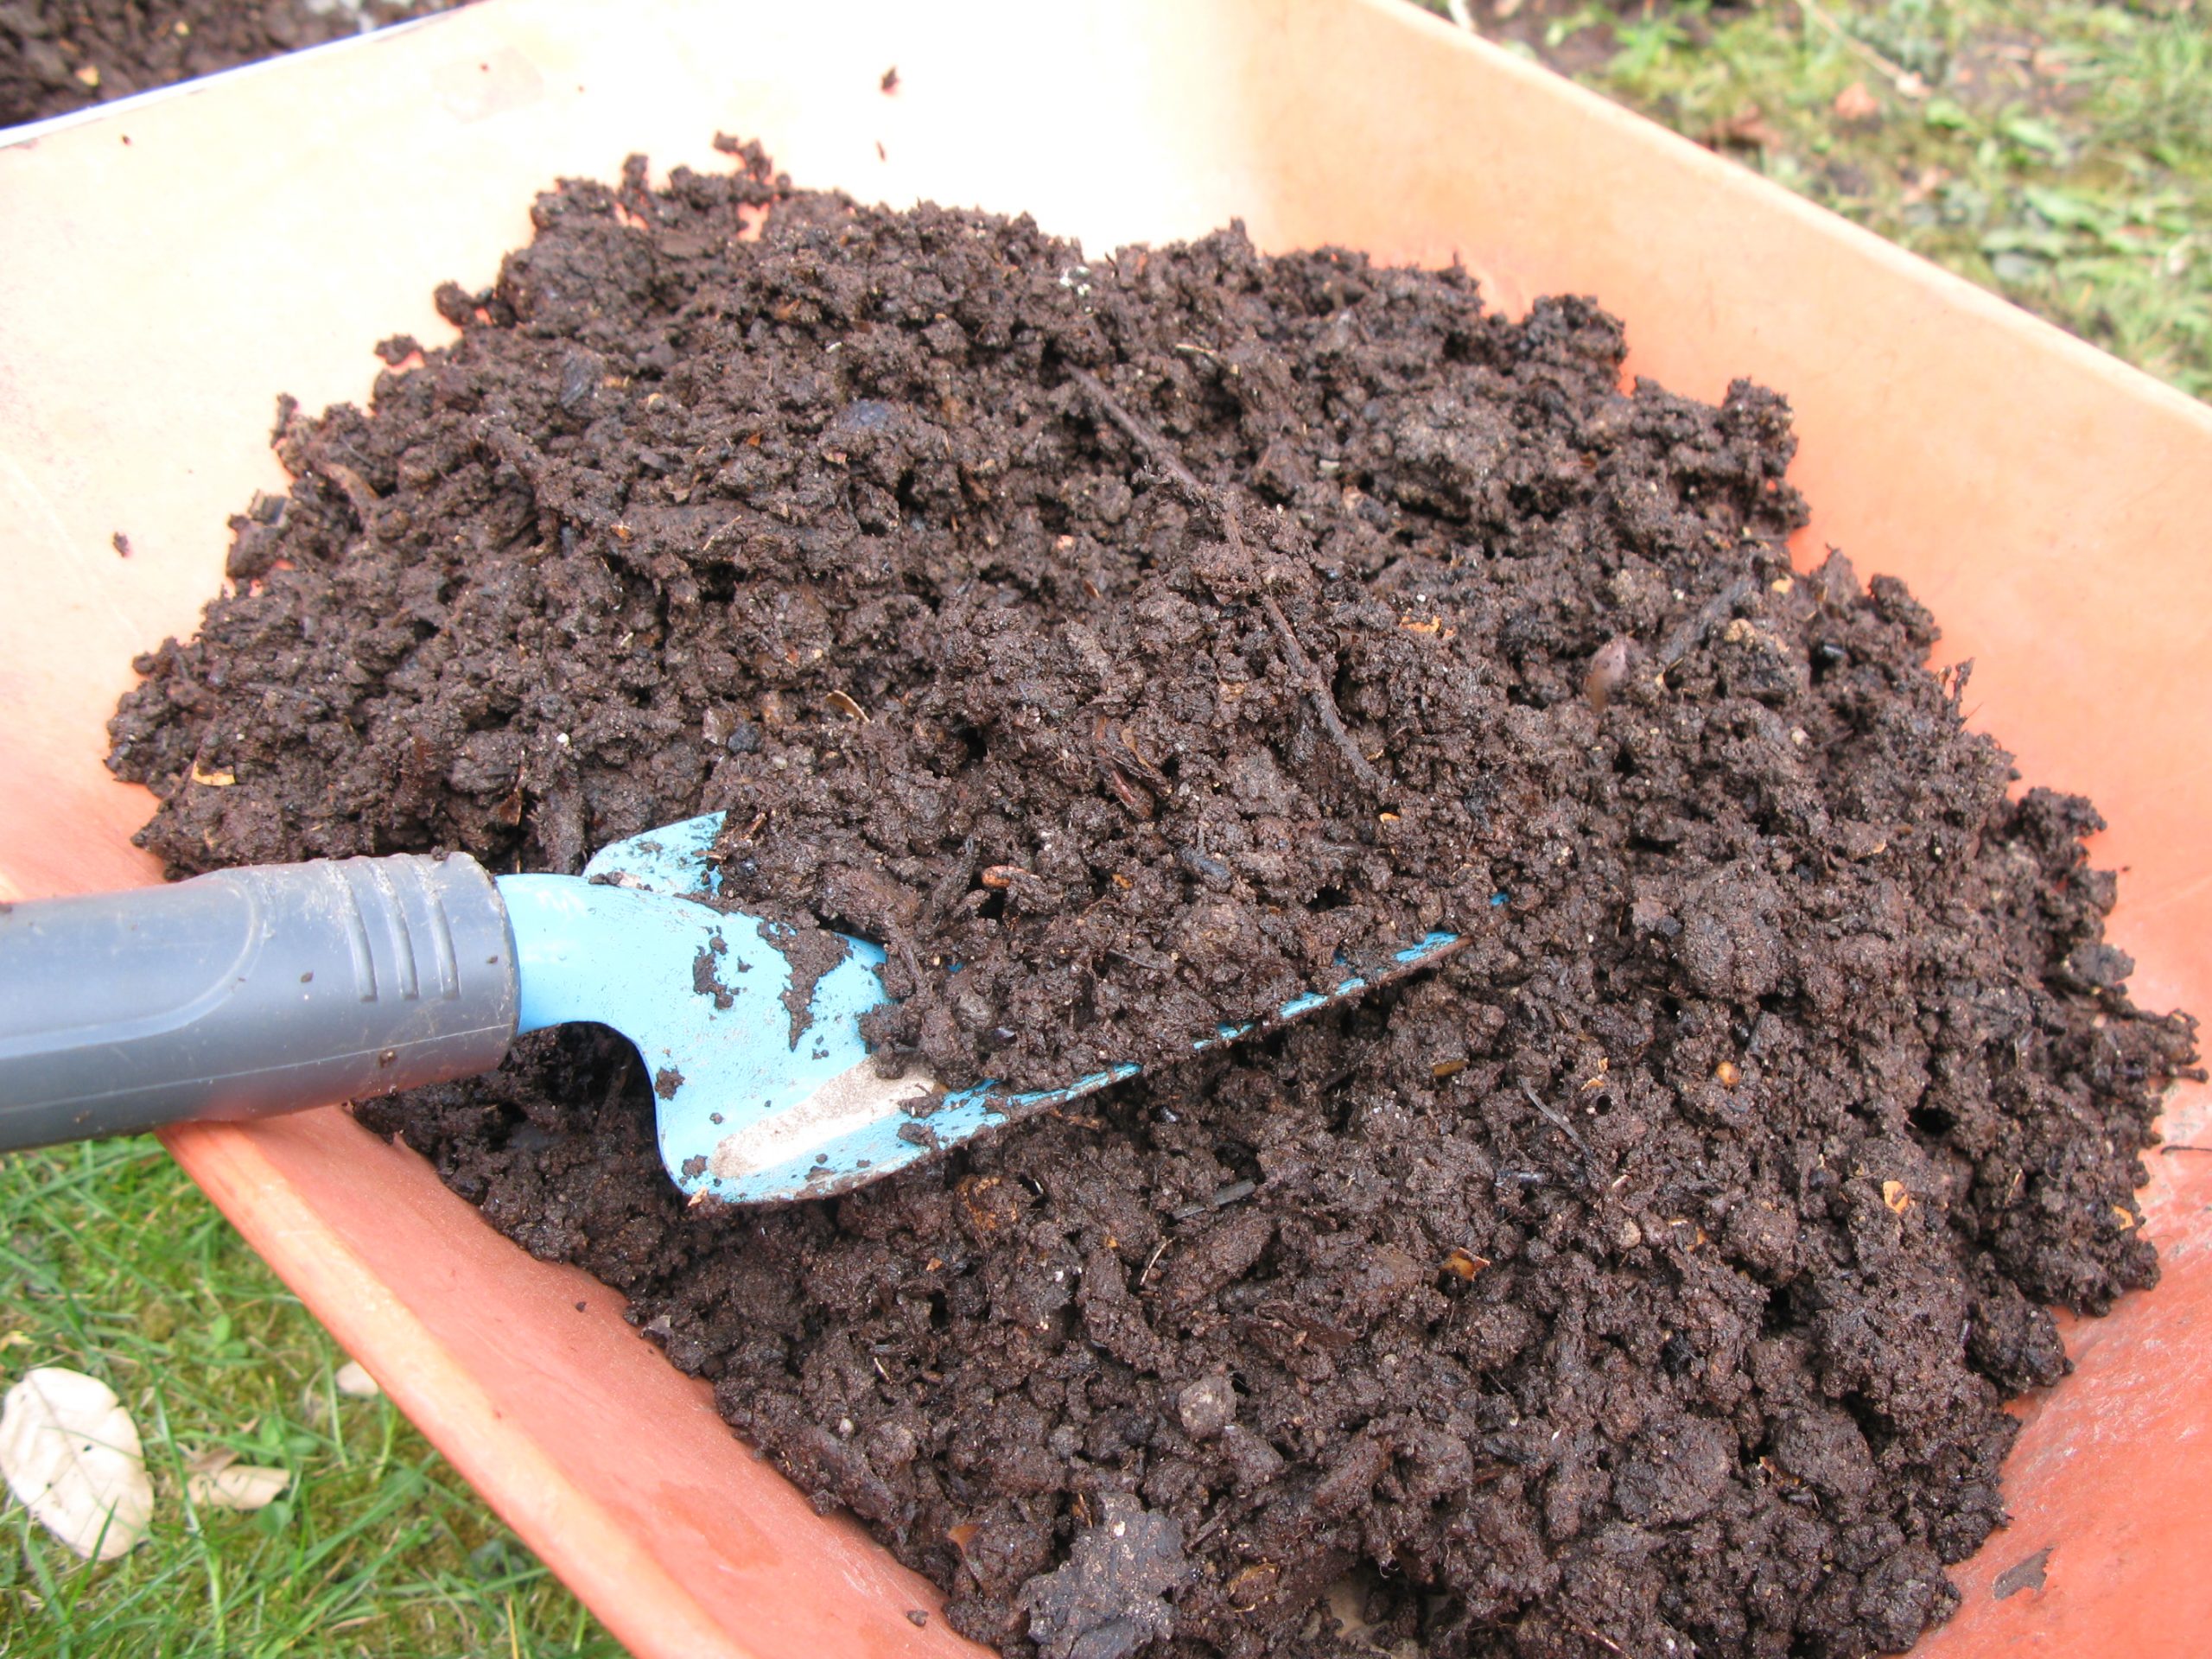 Adding compost to your soil